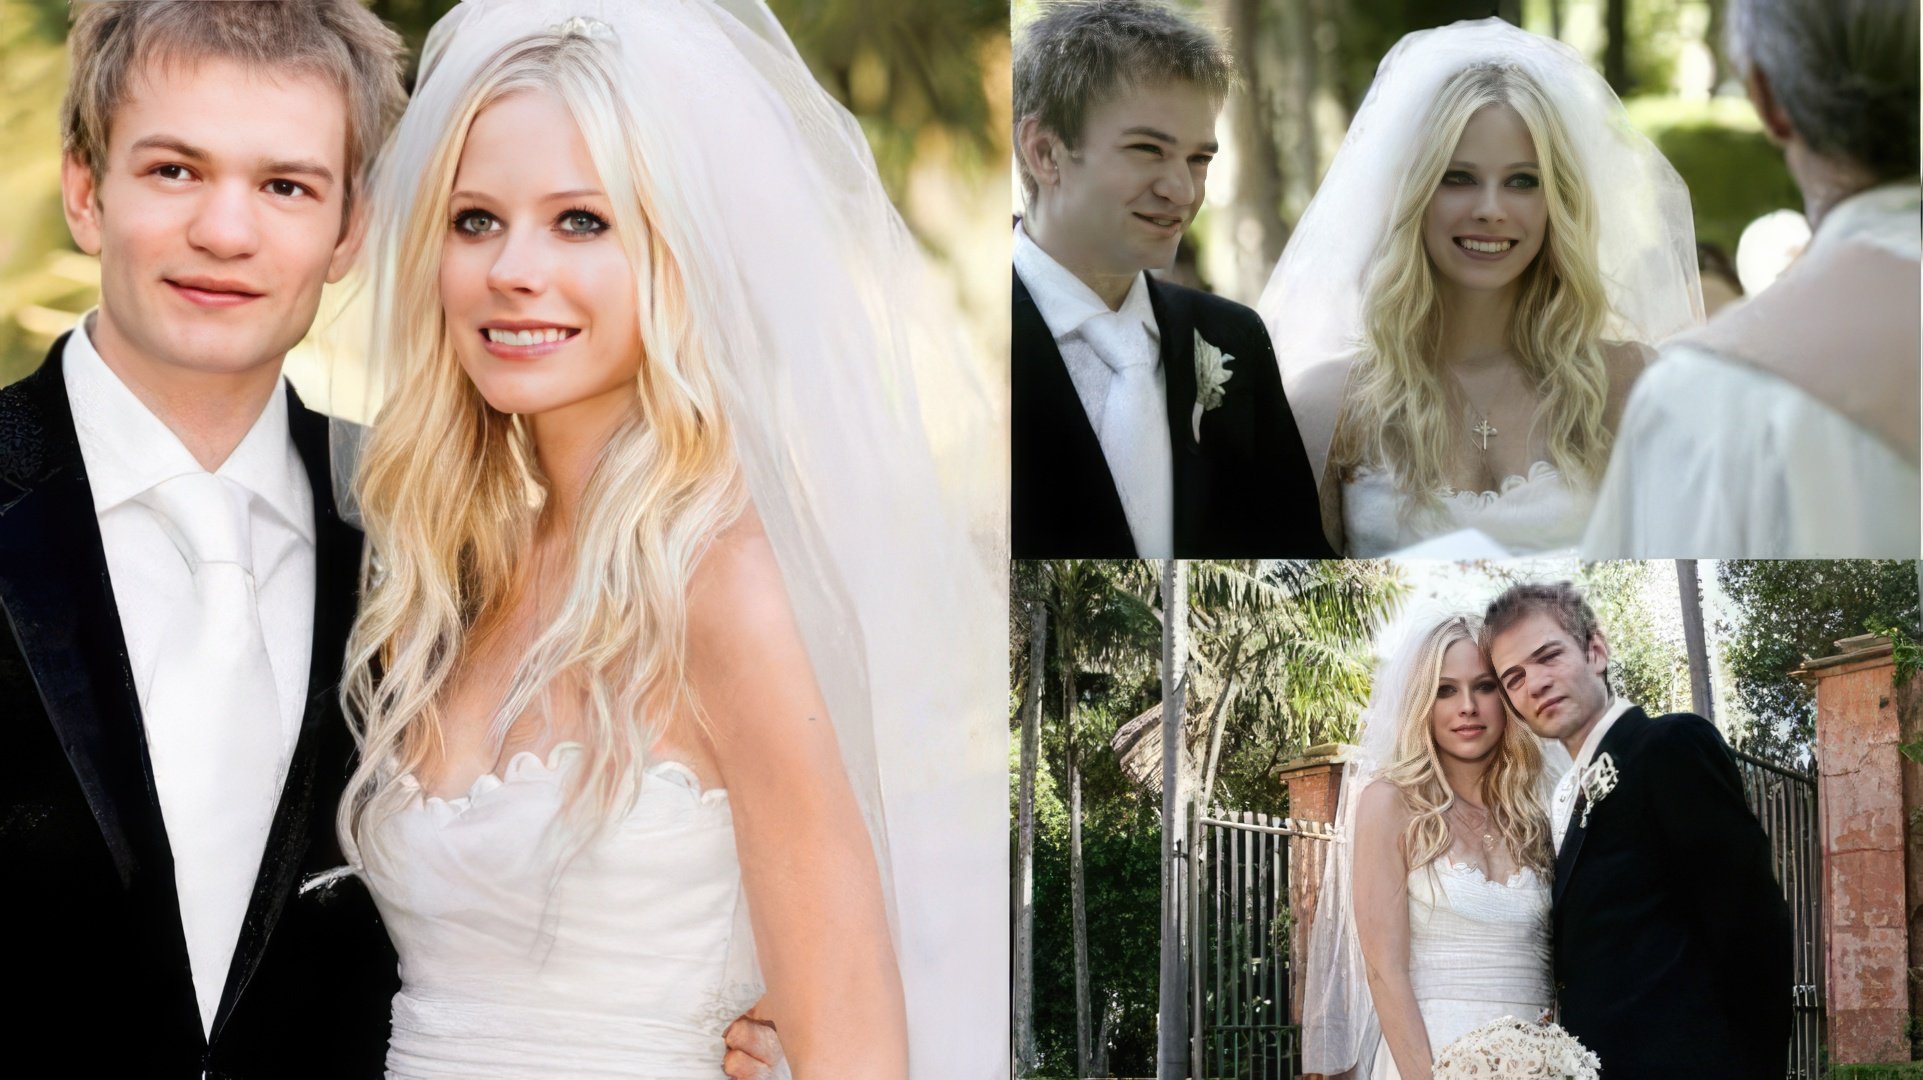 Wedding of Avril Lavigne and Deryck Whibley